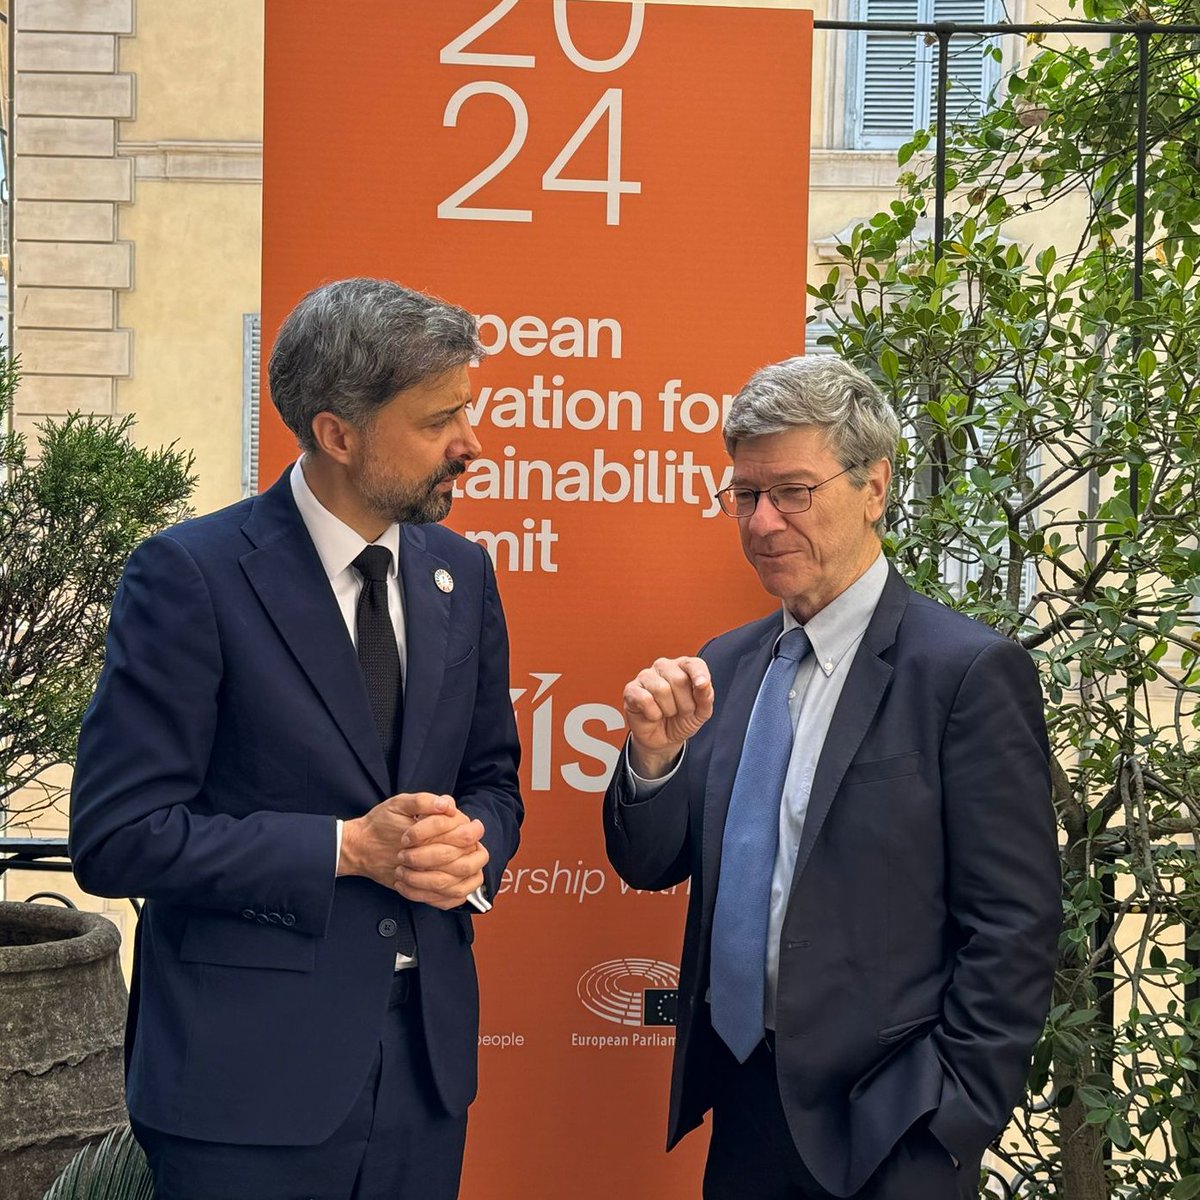 Professor Jeffrey Sachs brings new ideas and energy to any conversation. At #EIIS2024 in Rome, we spoke about evidence-based solutions and new innovations to address some of the most pressing problems rural communities face.